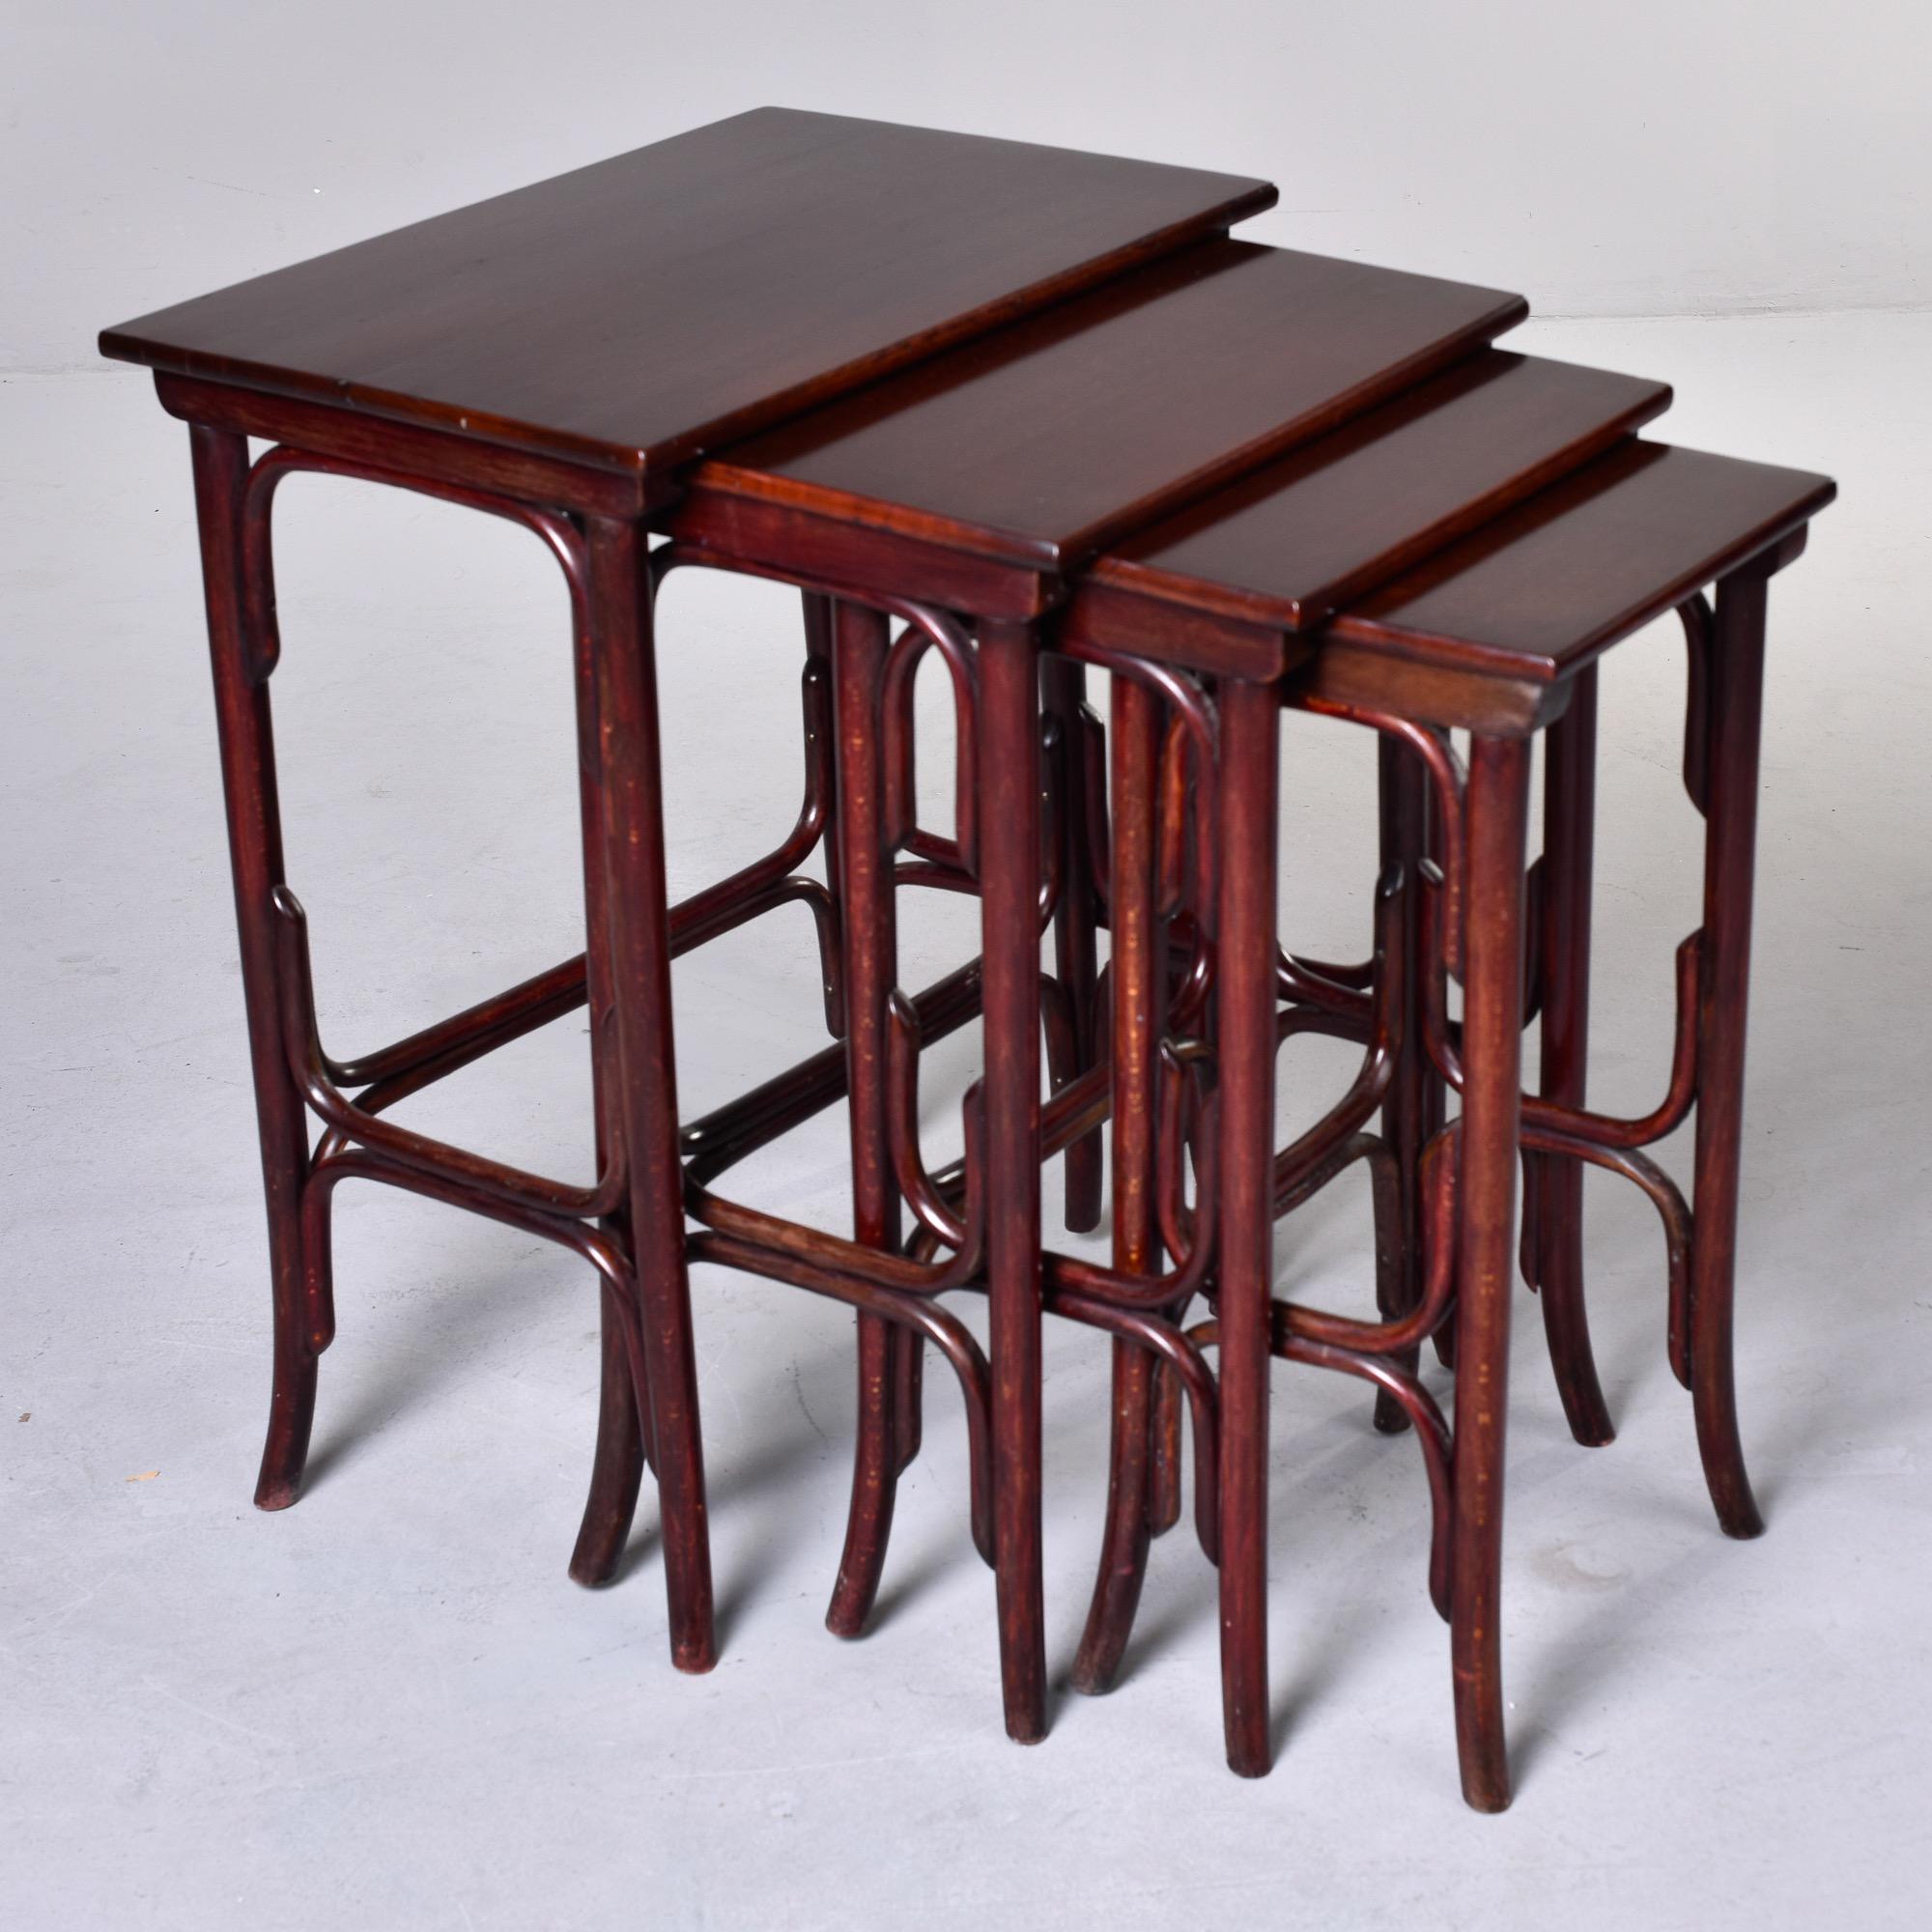 Early 20th C Thonet Quartetto Nesting Tables In Good Condition For Sale In Troy, MI